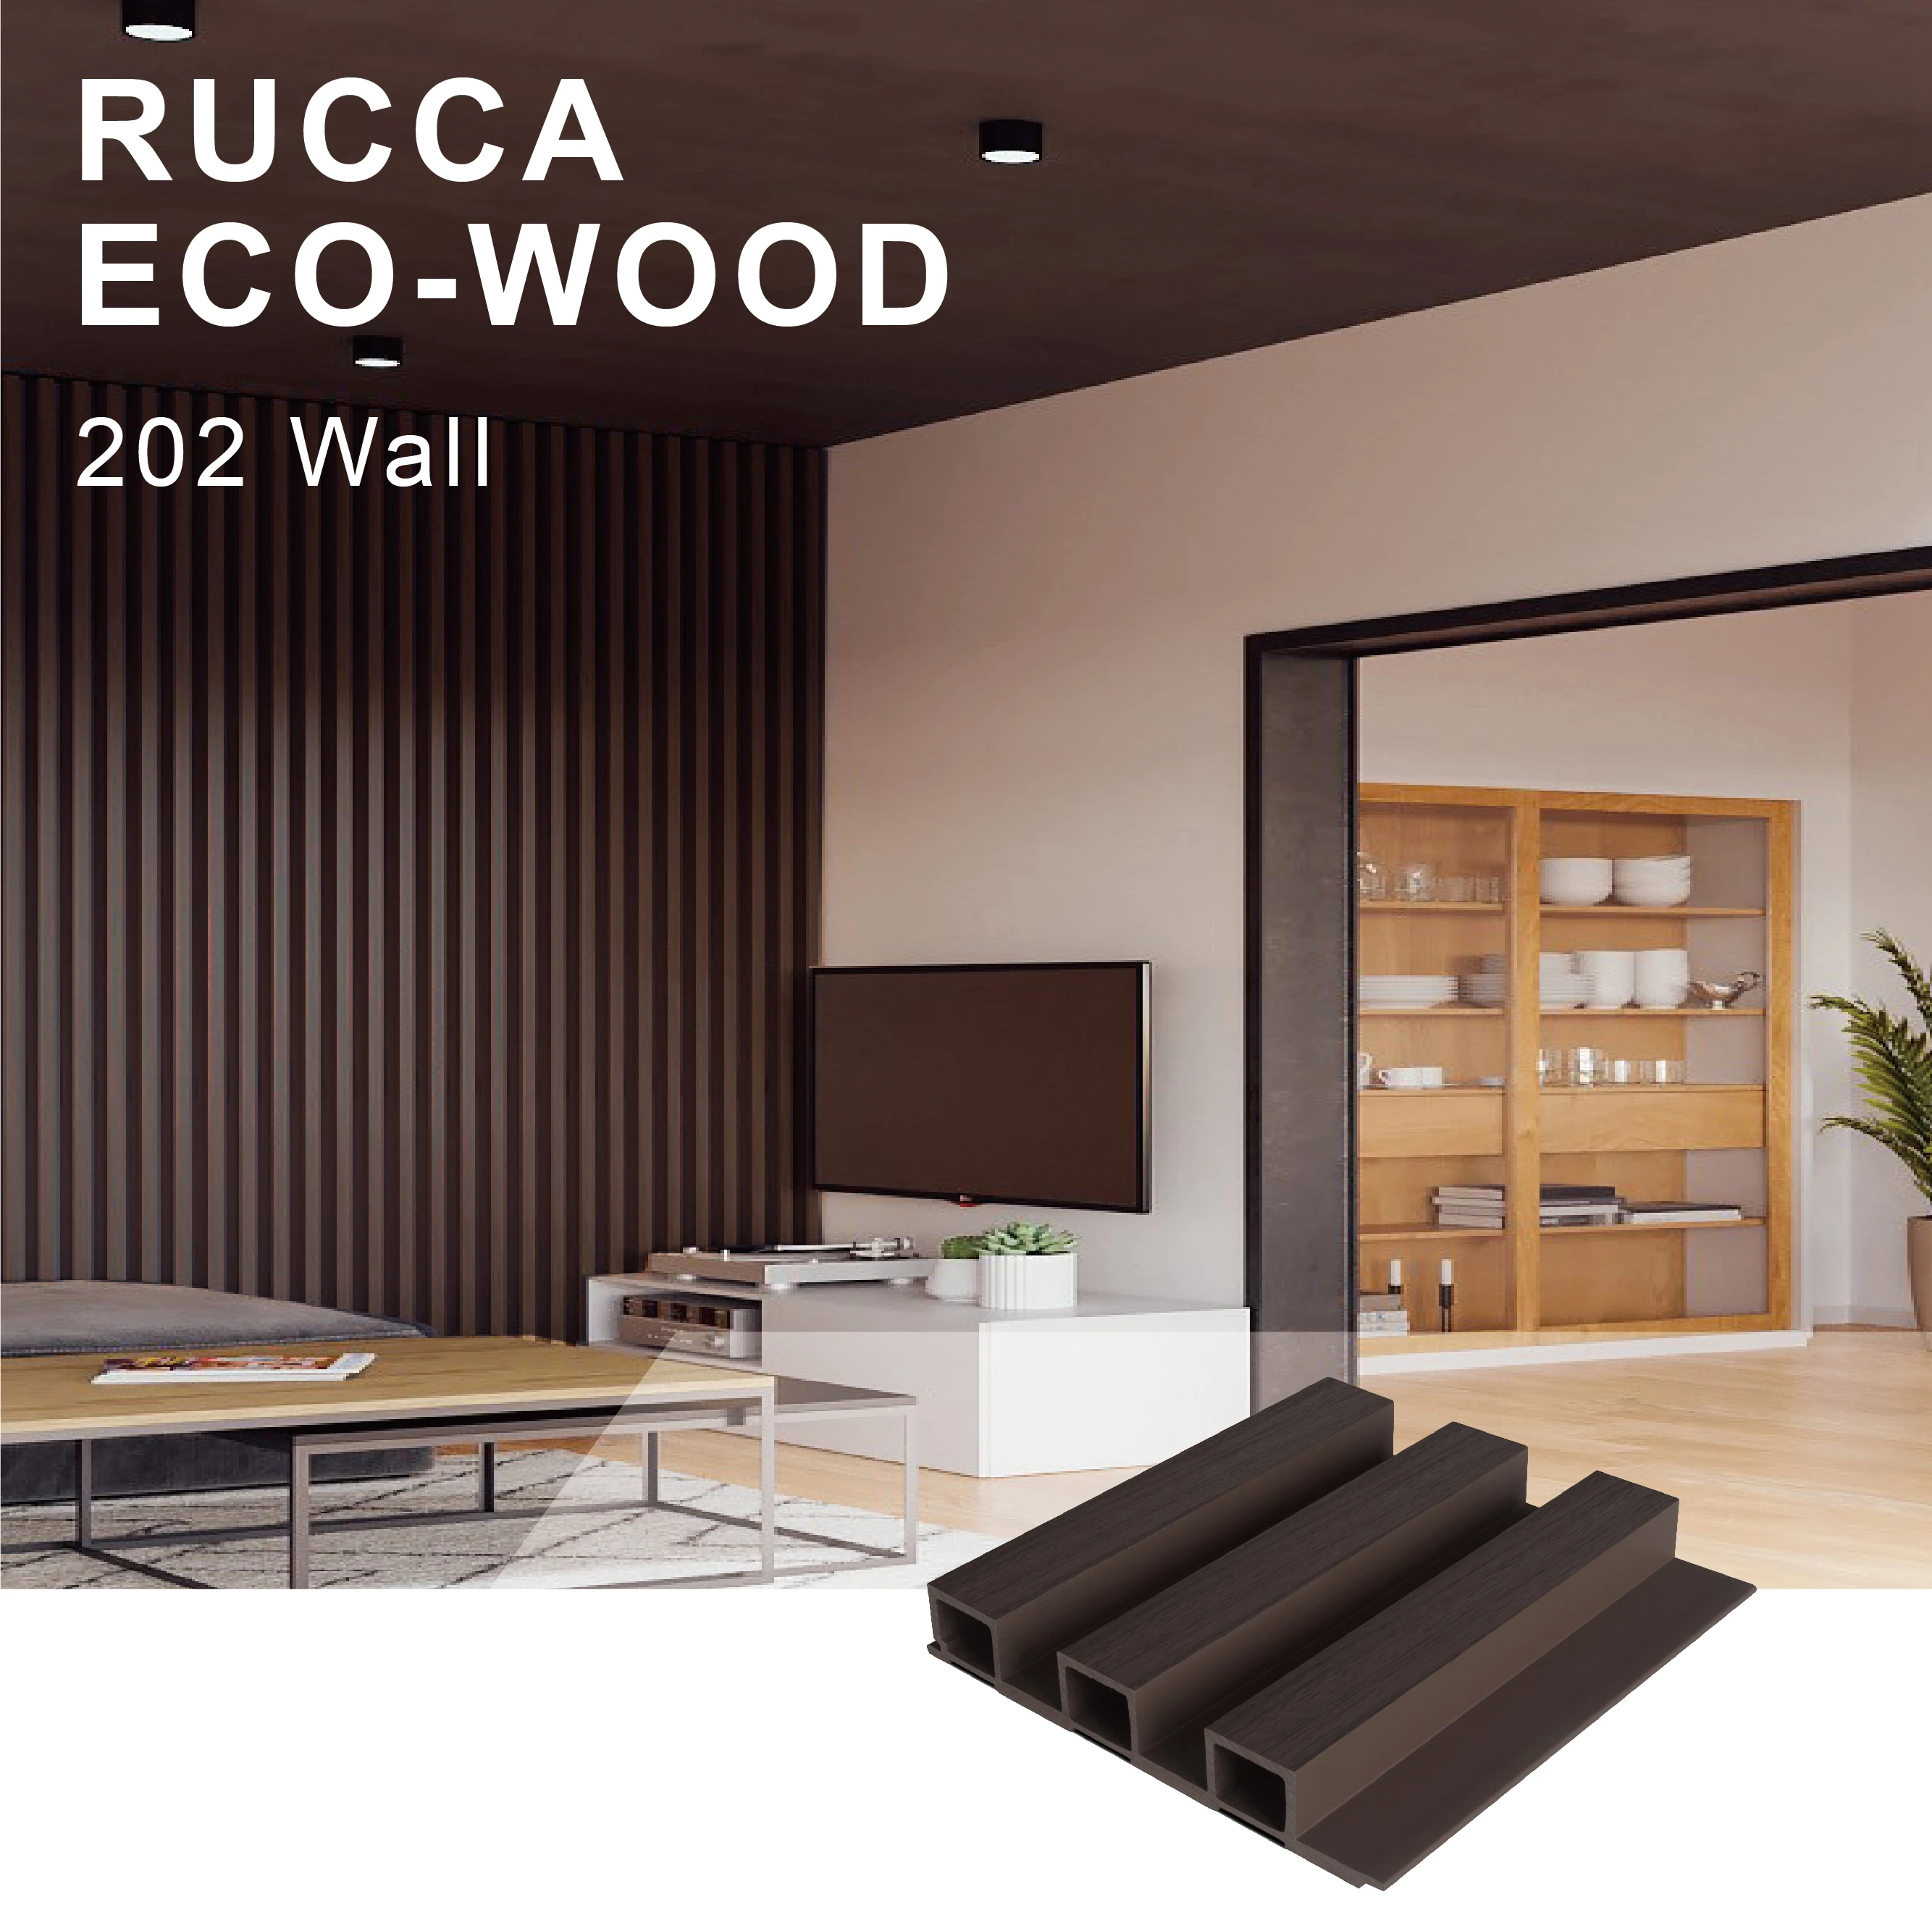 Rucca WPC Foshan Wall Panel Black Color Decorative Board Cladding Design 202*30mm Guangdong OEM/ODM Factory